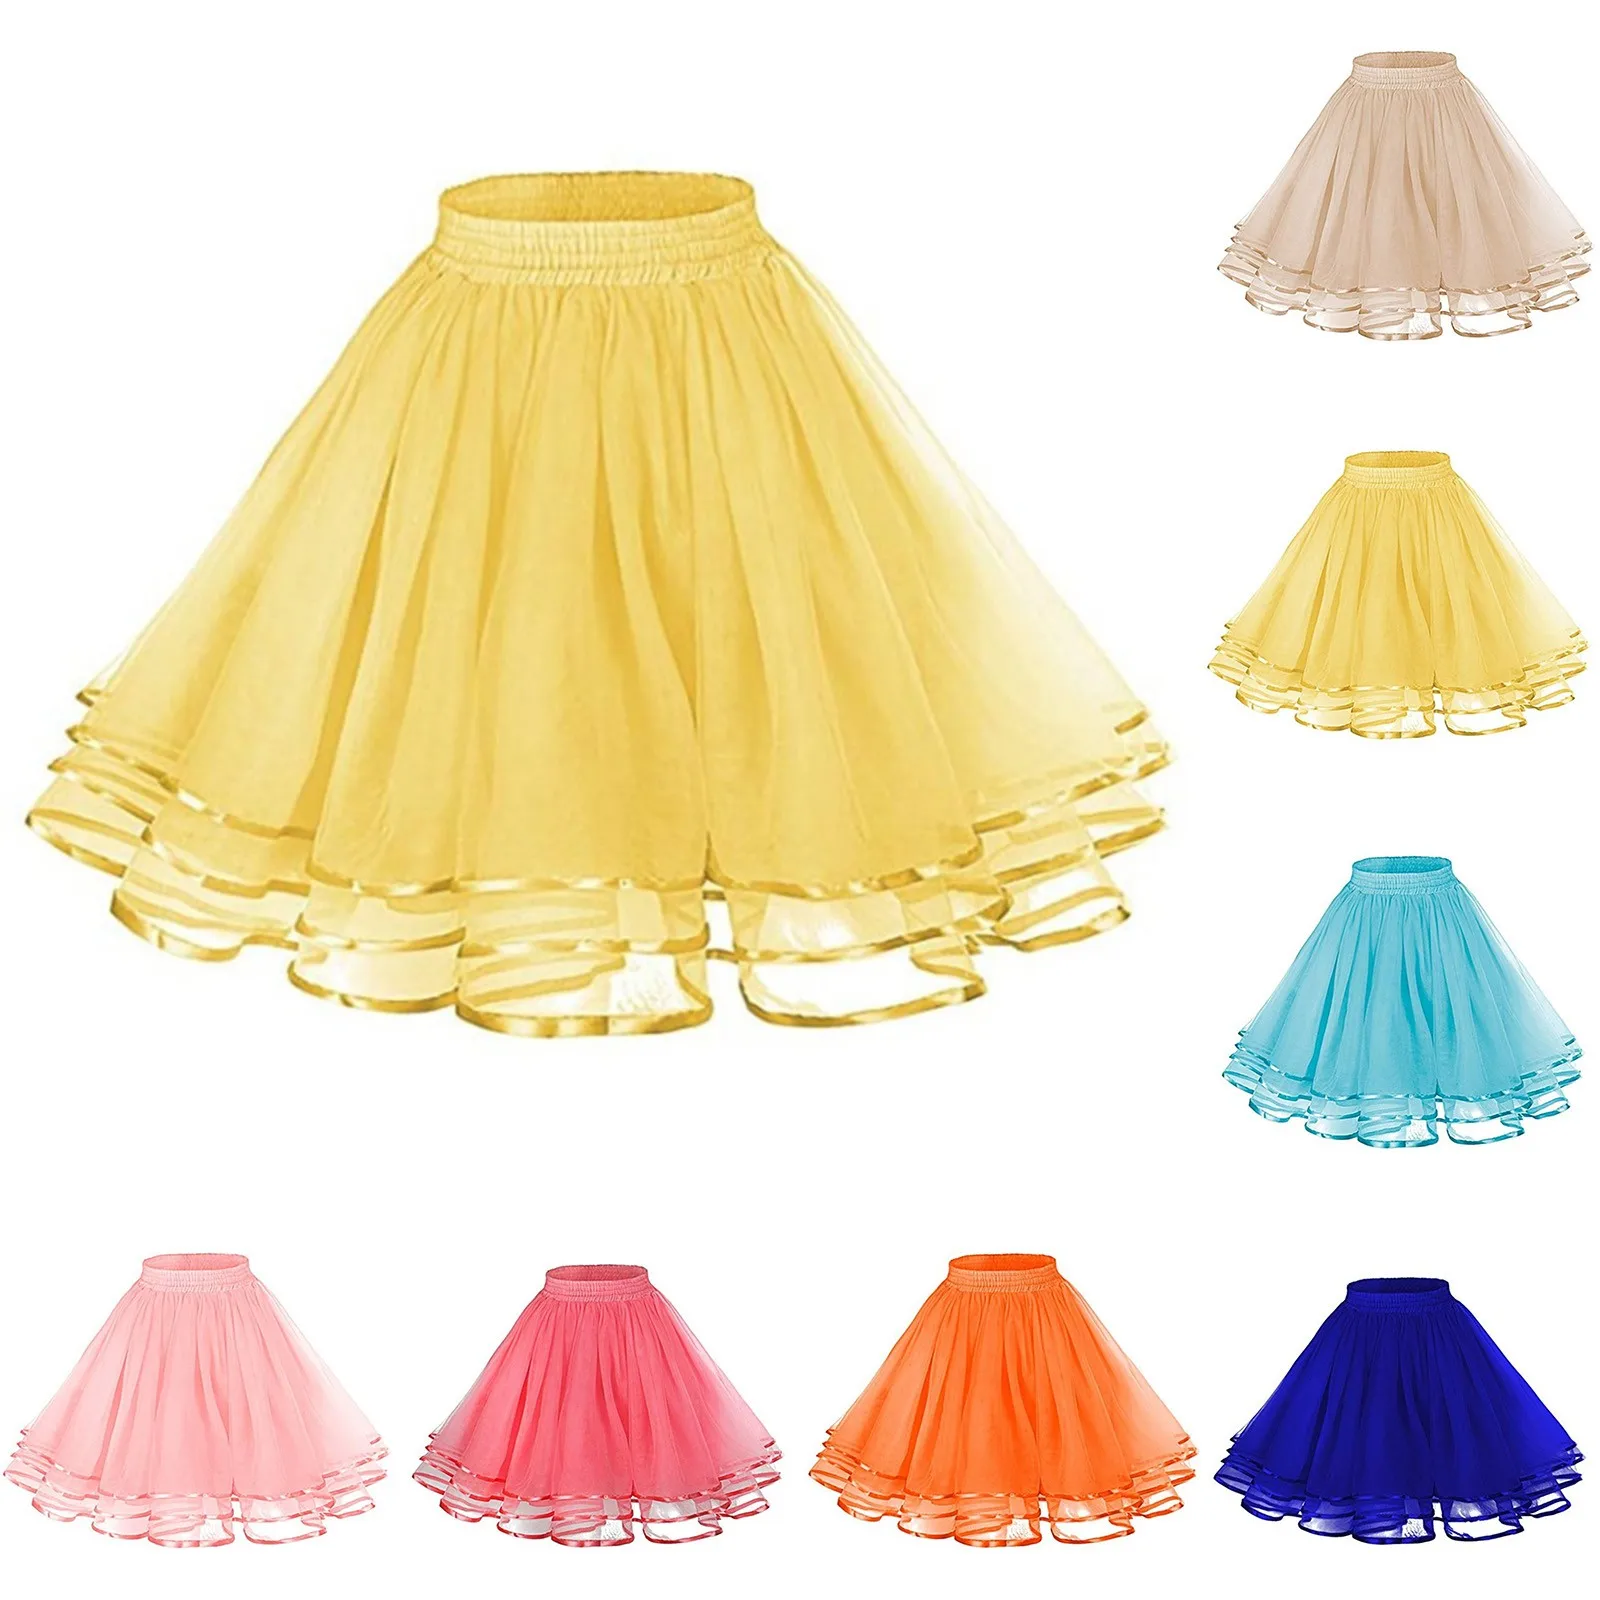 

Women Multilayer Sexy Striped Mini Pleated Skirt Showgirl Party Mesh Tulle Dance Tutu Skirts Match Corset Skirt Plus Size